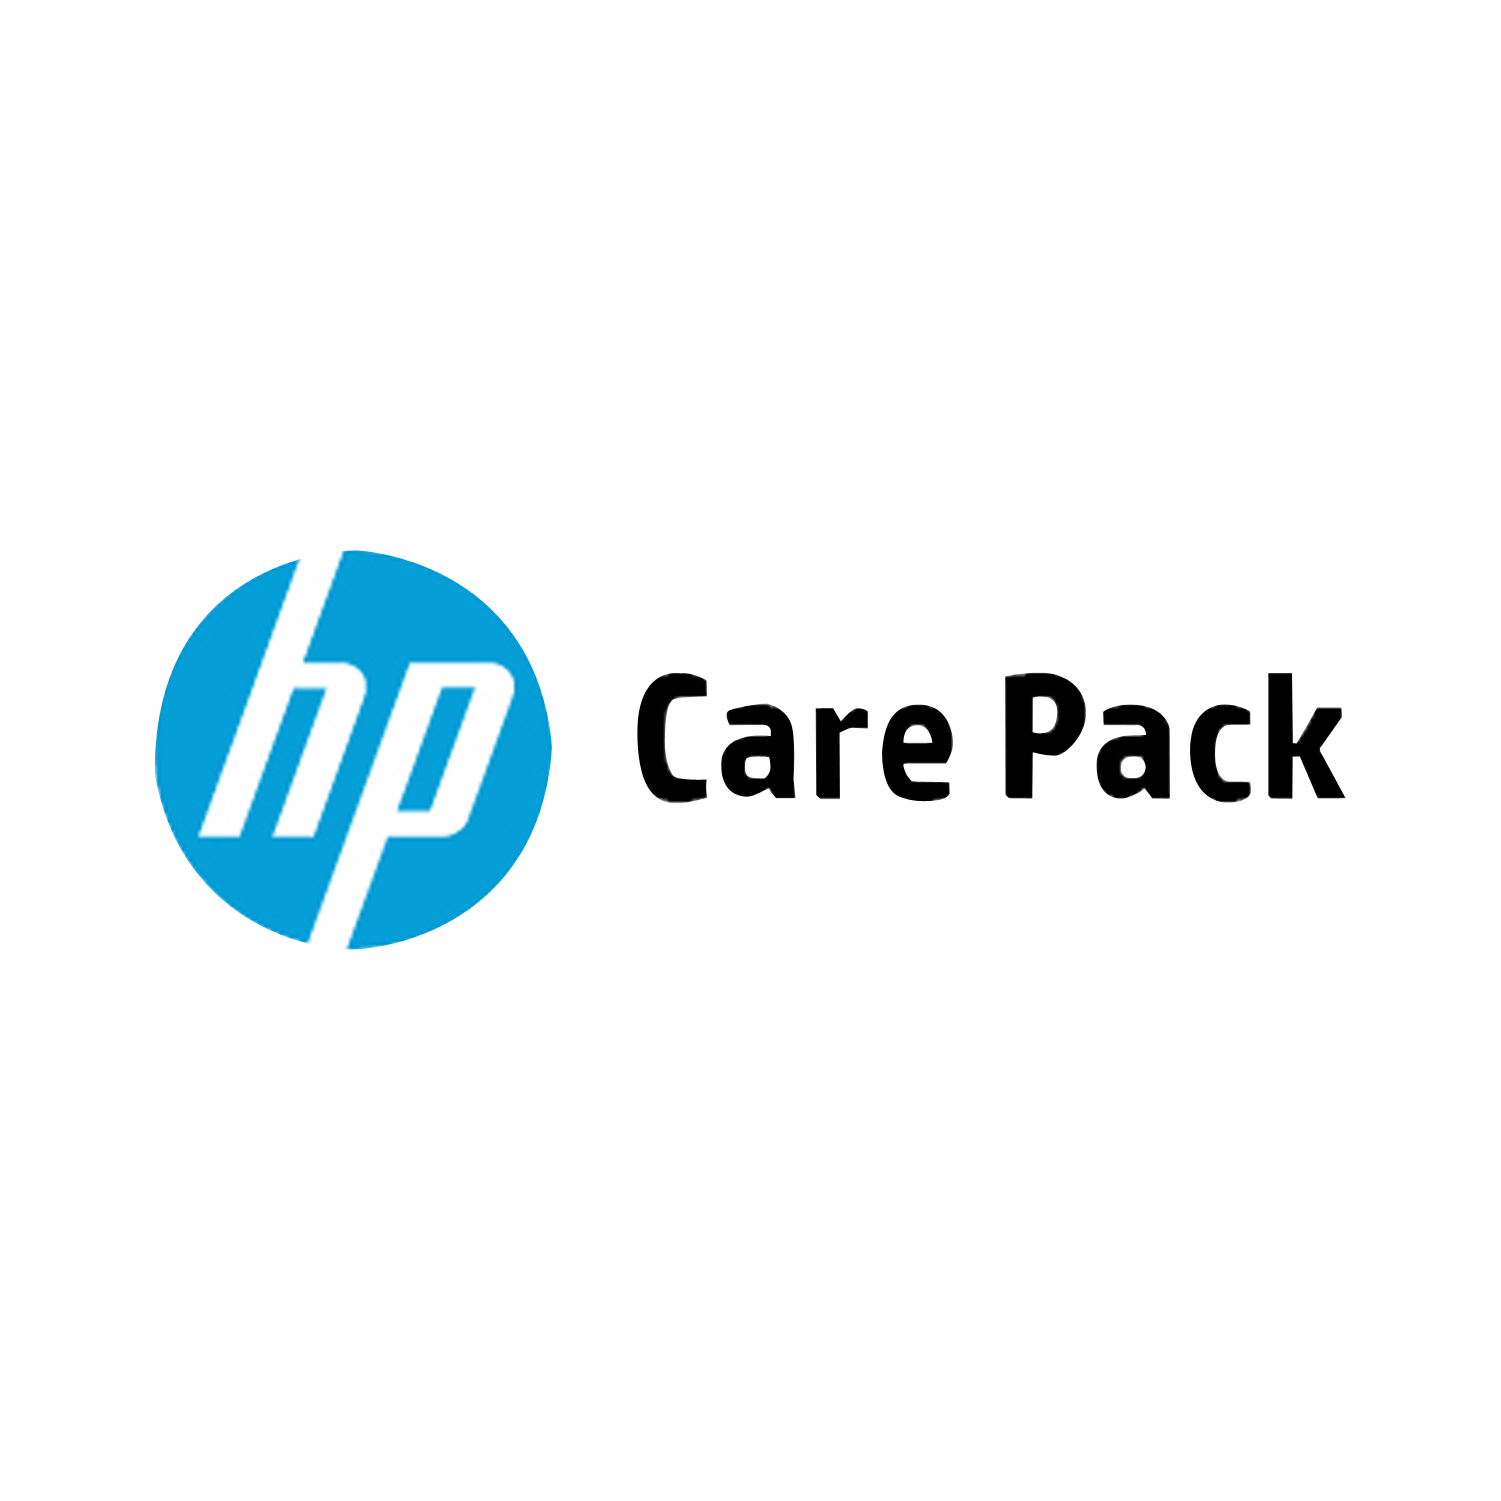 HPE Electronic HP Care Pack Next Business Day Hardware Support with Preventive Maintenance Kit per year